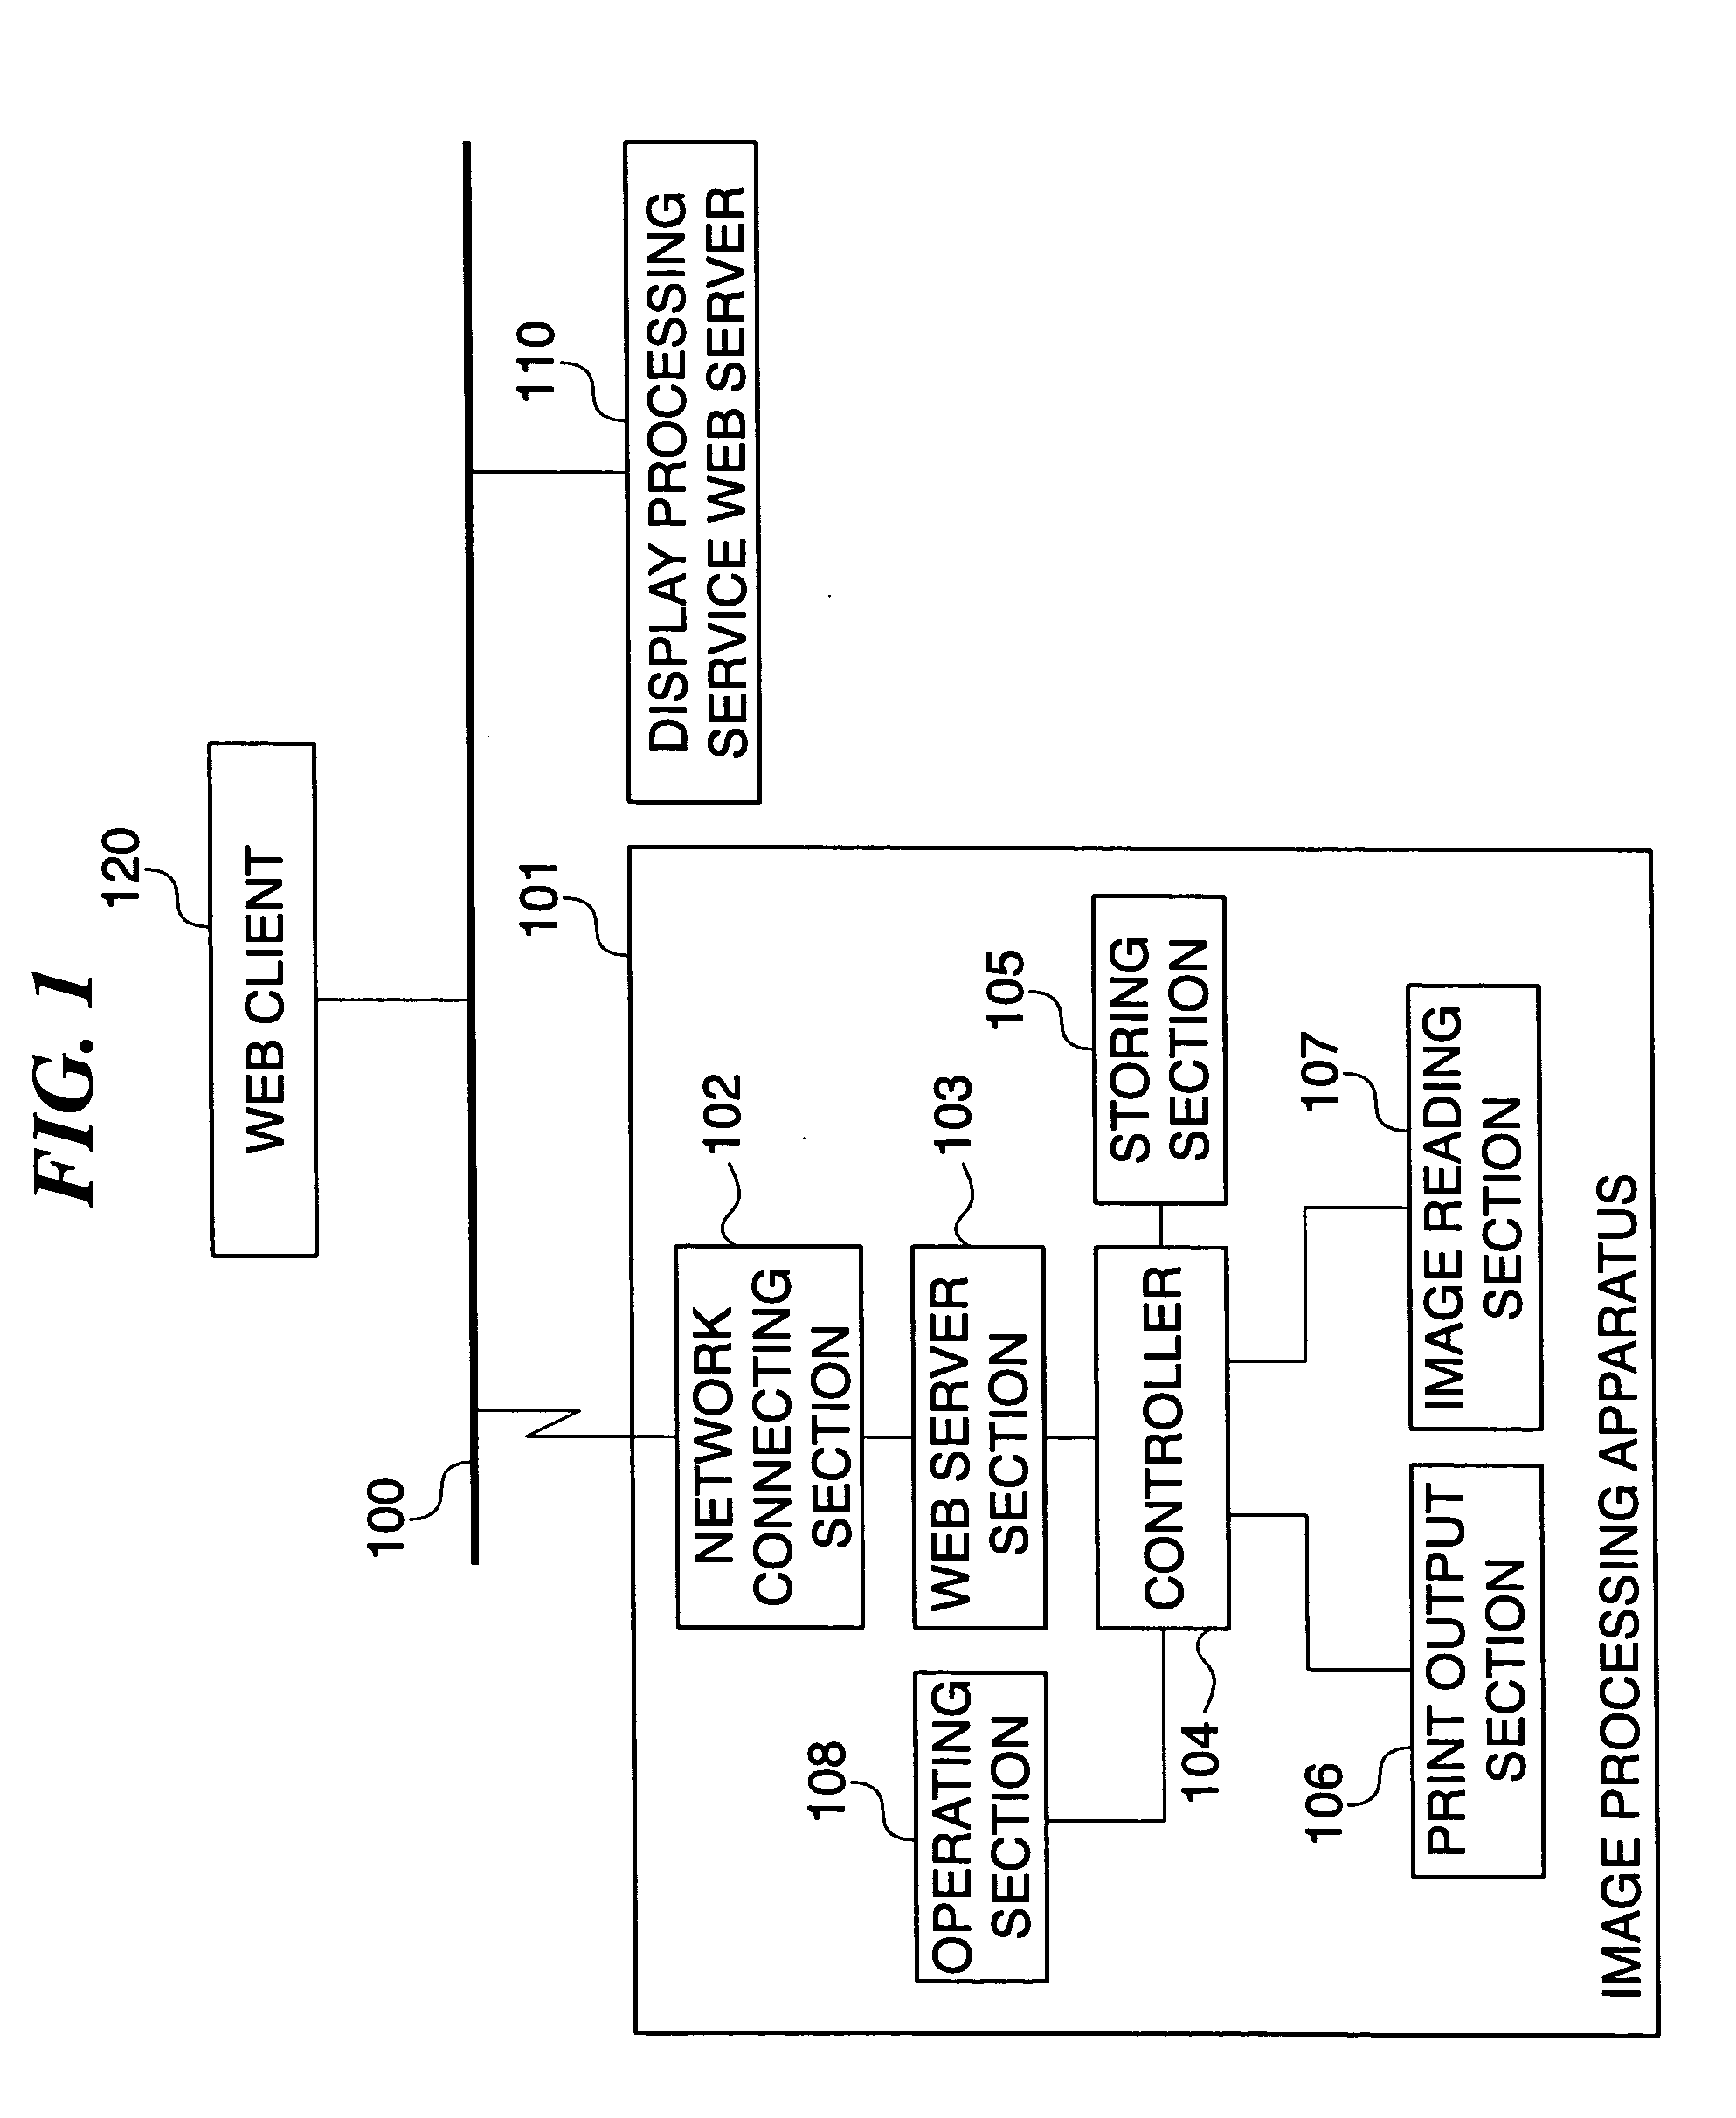 Image processing system, image processing method, image processing apparatus, program for implementing the method, and storage medium